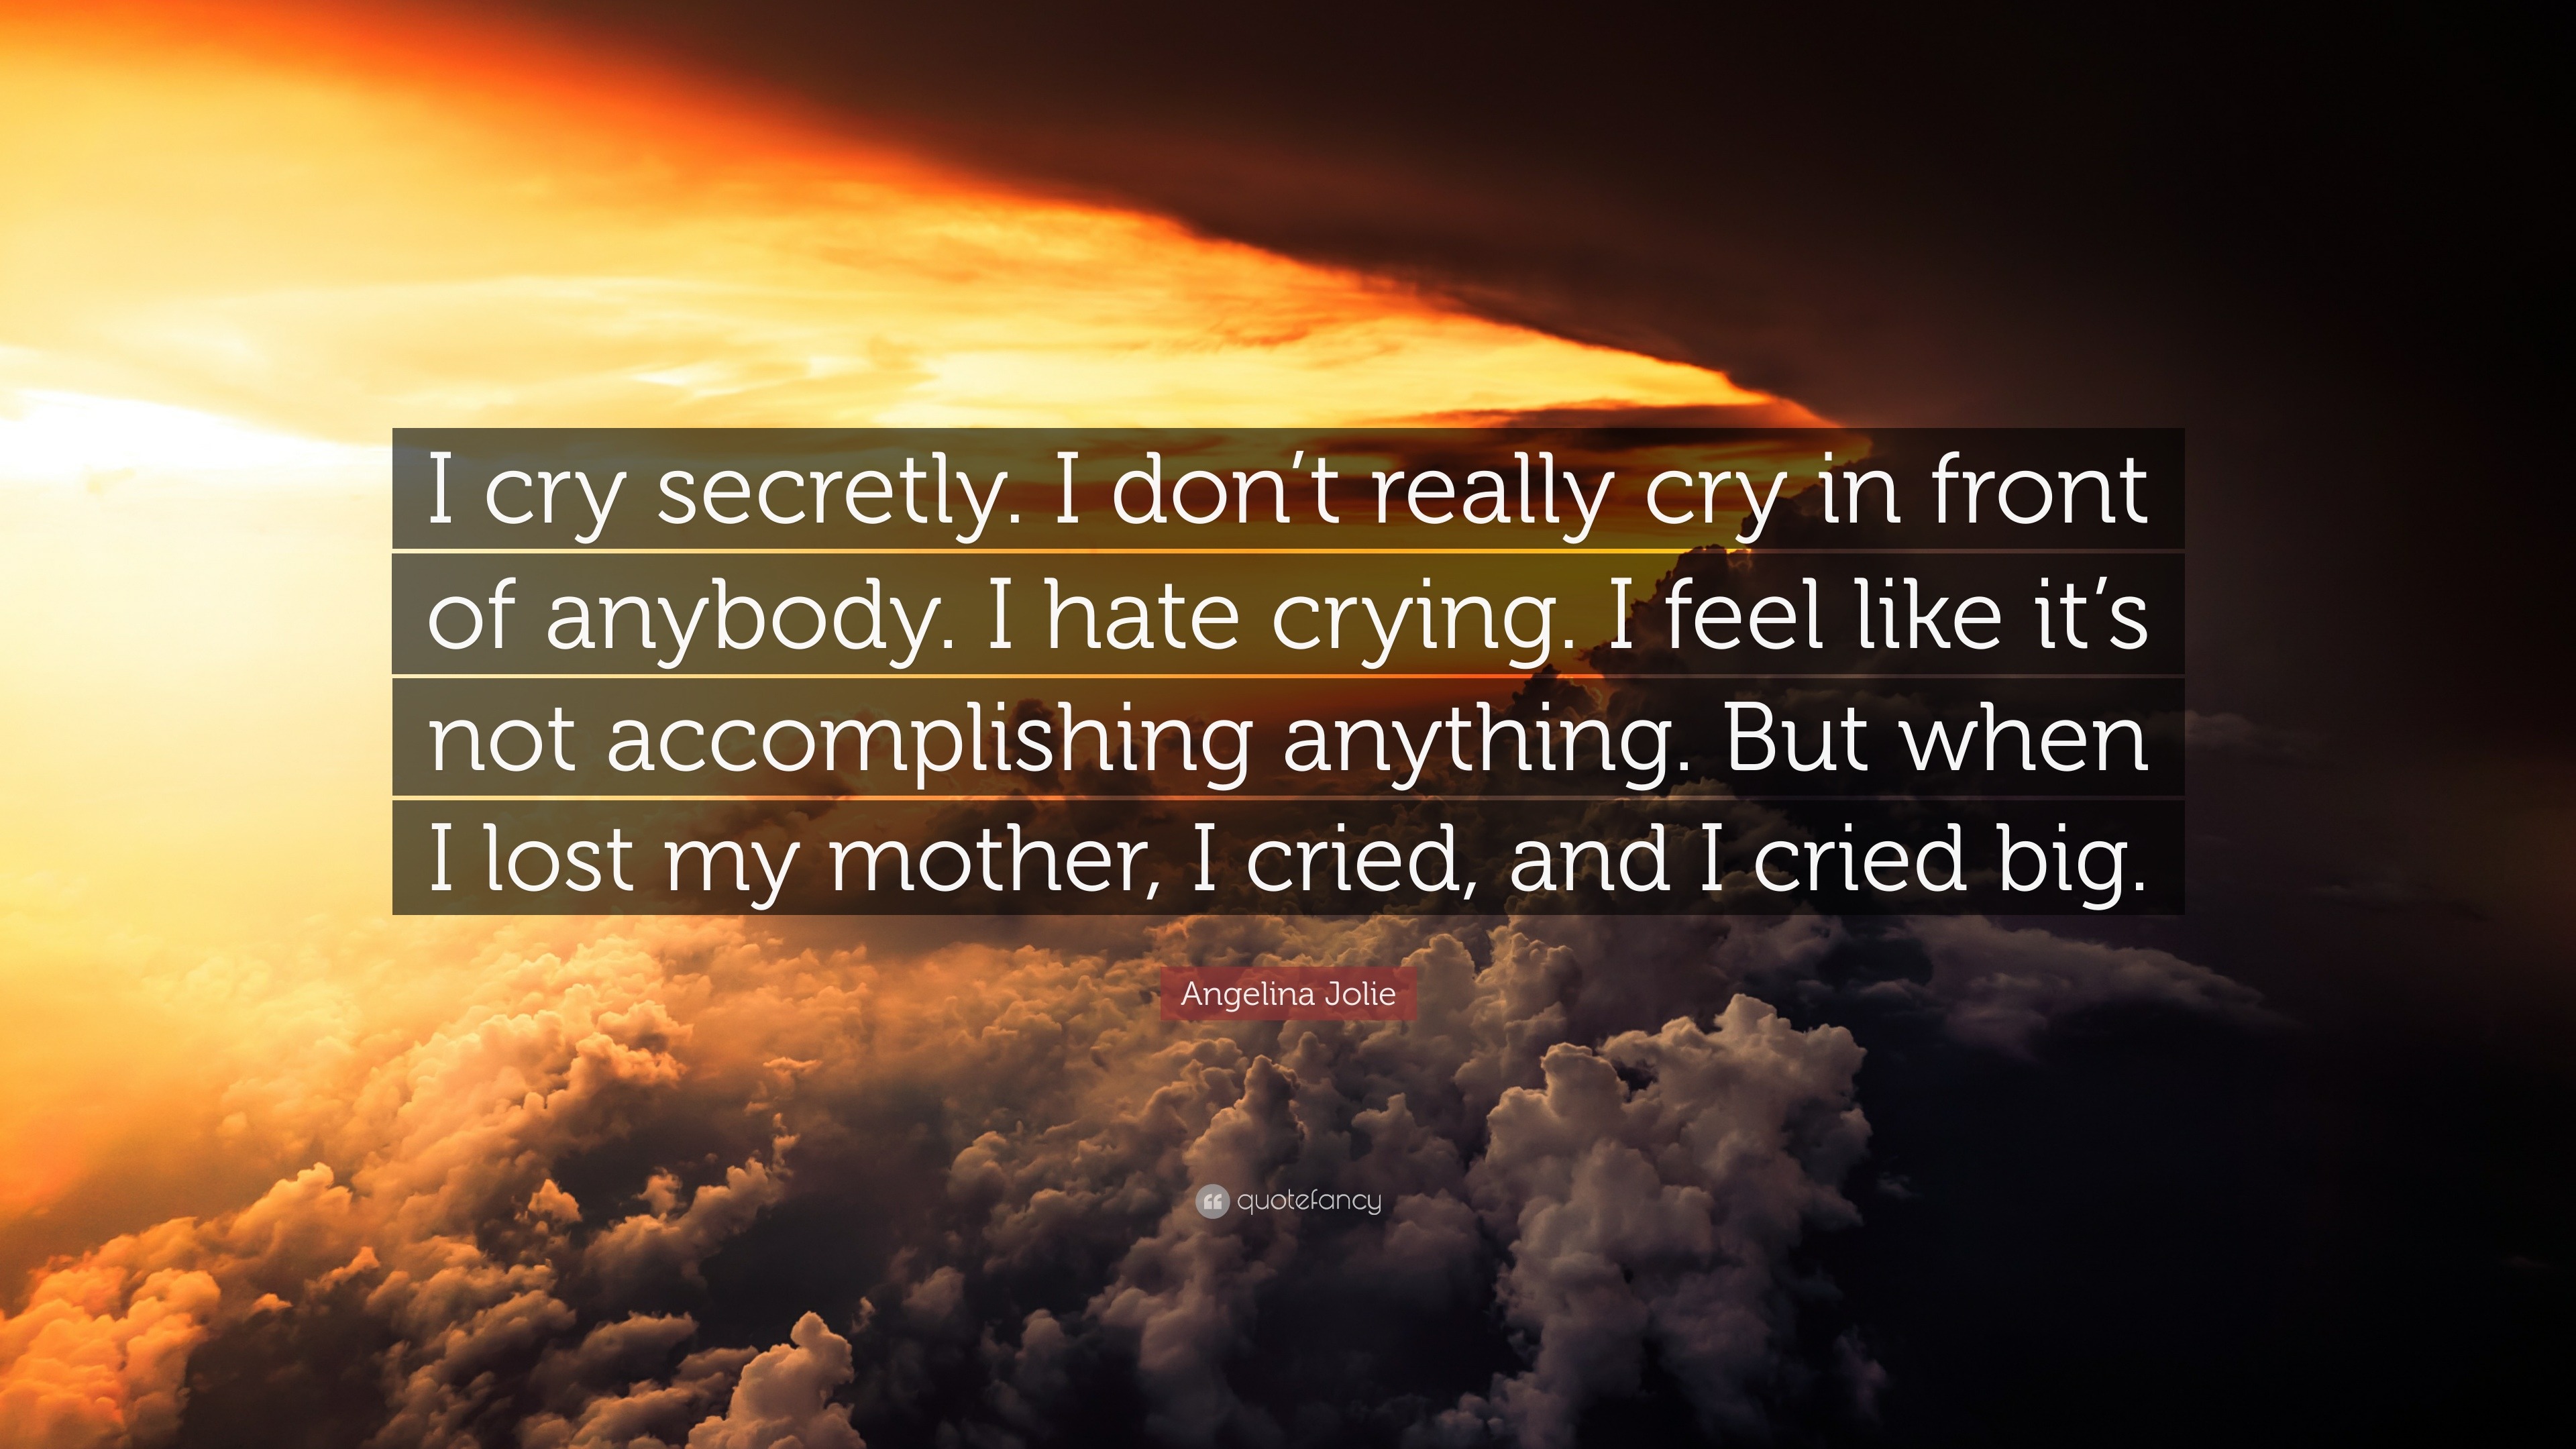 Angelina Jolie Quote I Cry Secretly I Don T Really Cry In Front Of Anybody I Hate Crying I Feel Like It S Not Accomplishing Anything But